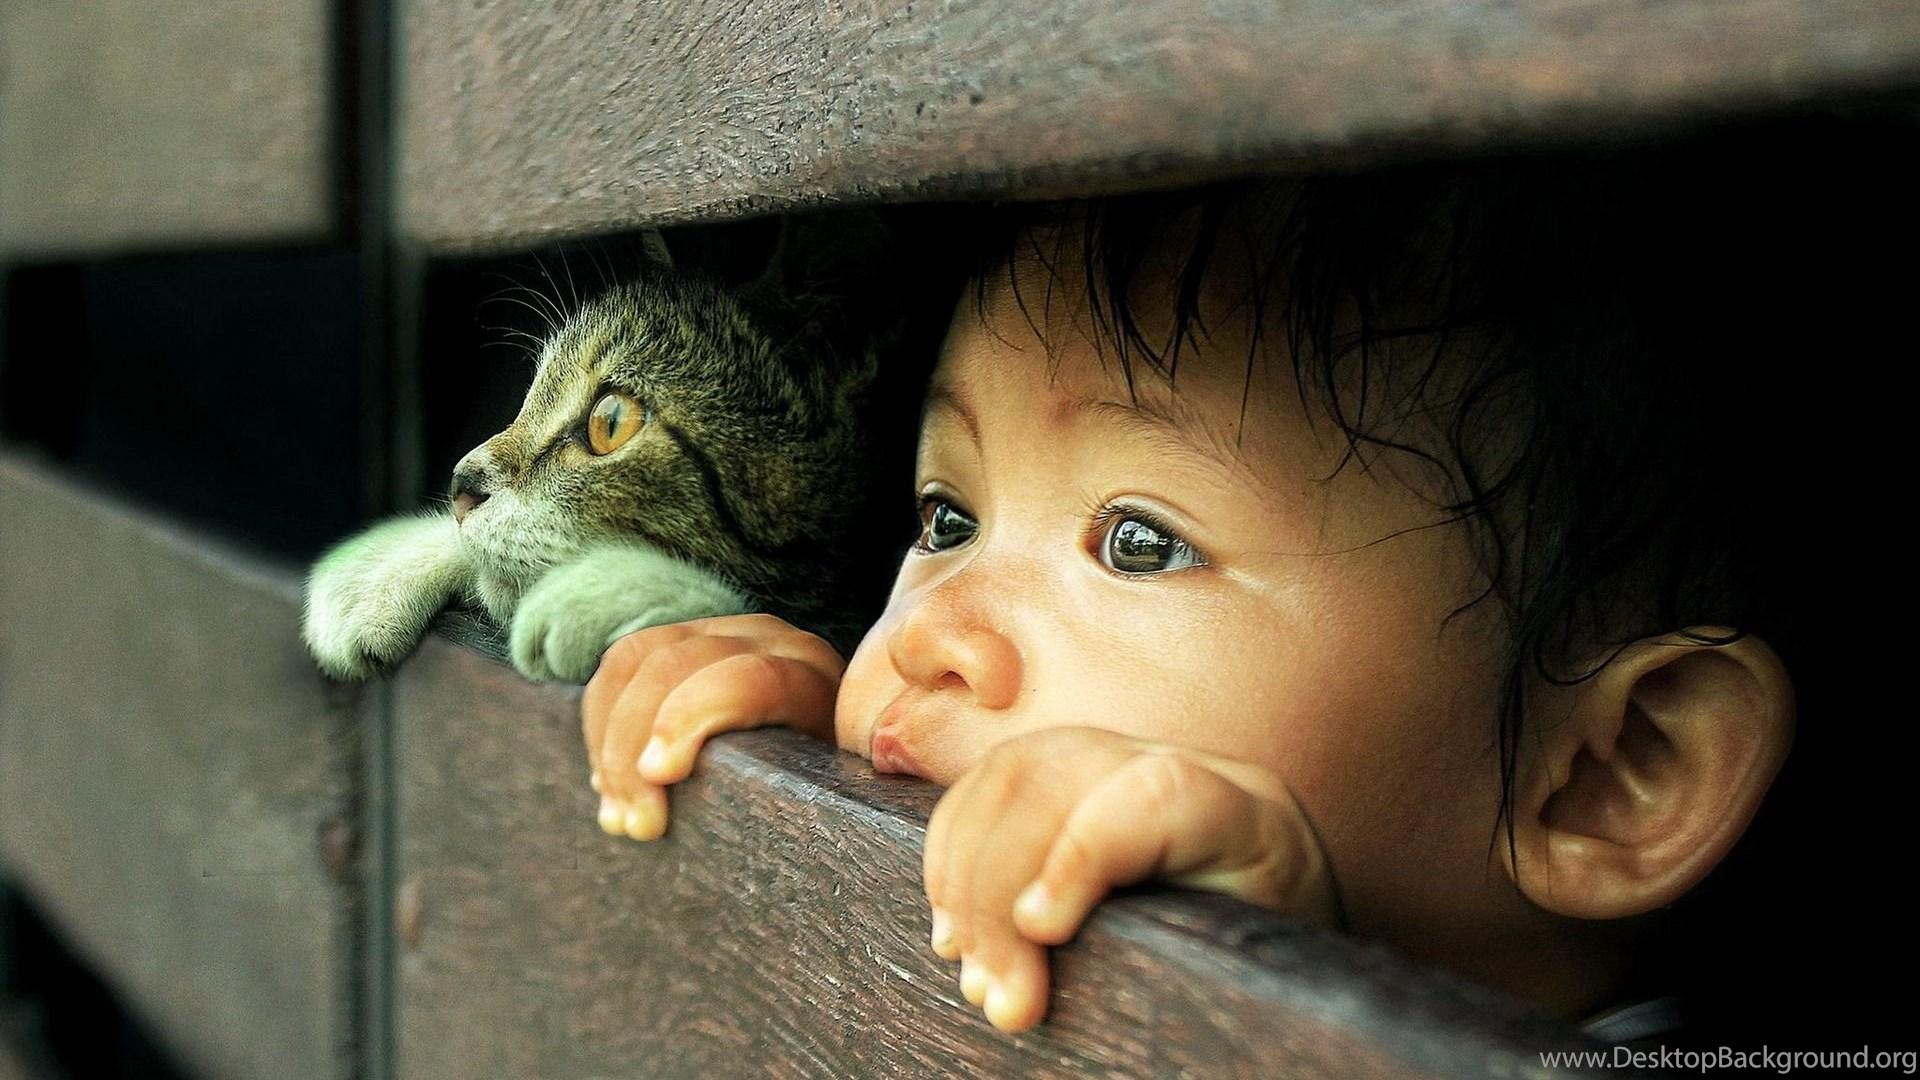 Situations, Innocence, Child, Cat, Friend, Mood, Hope, Wallpaper HD